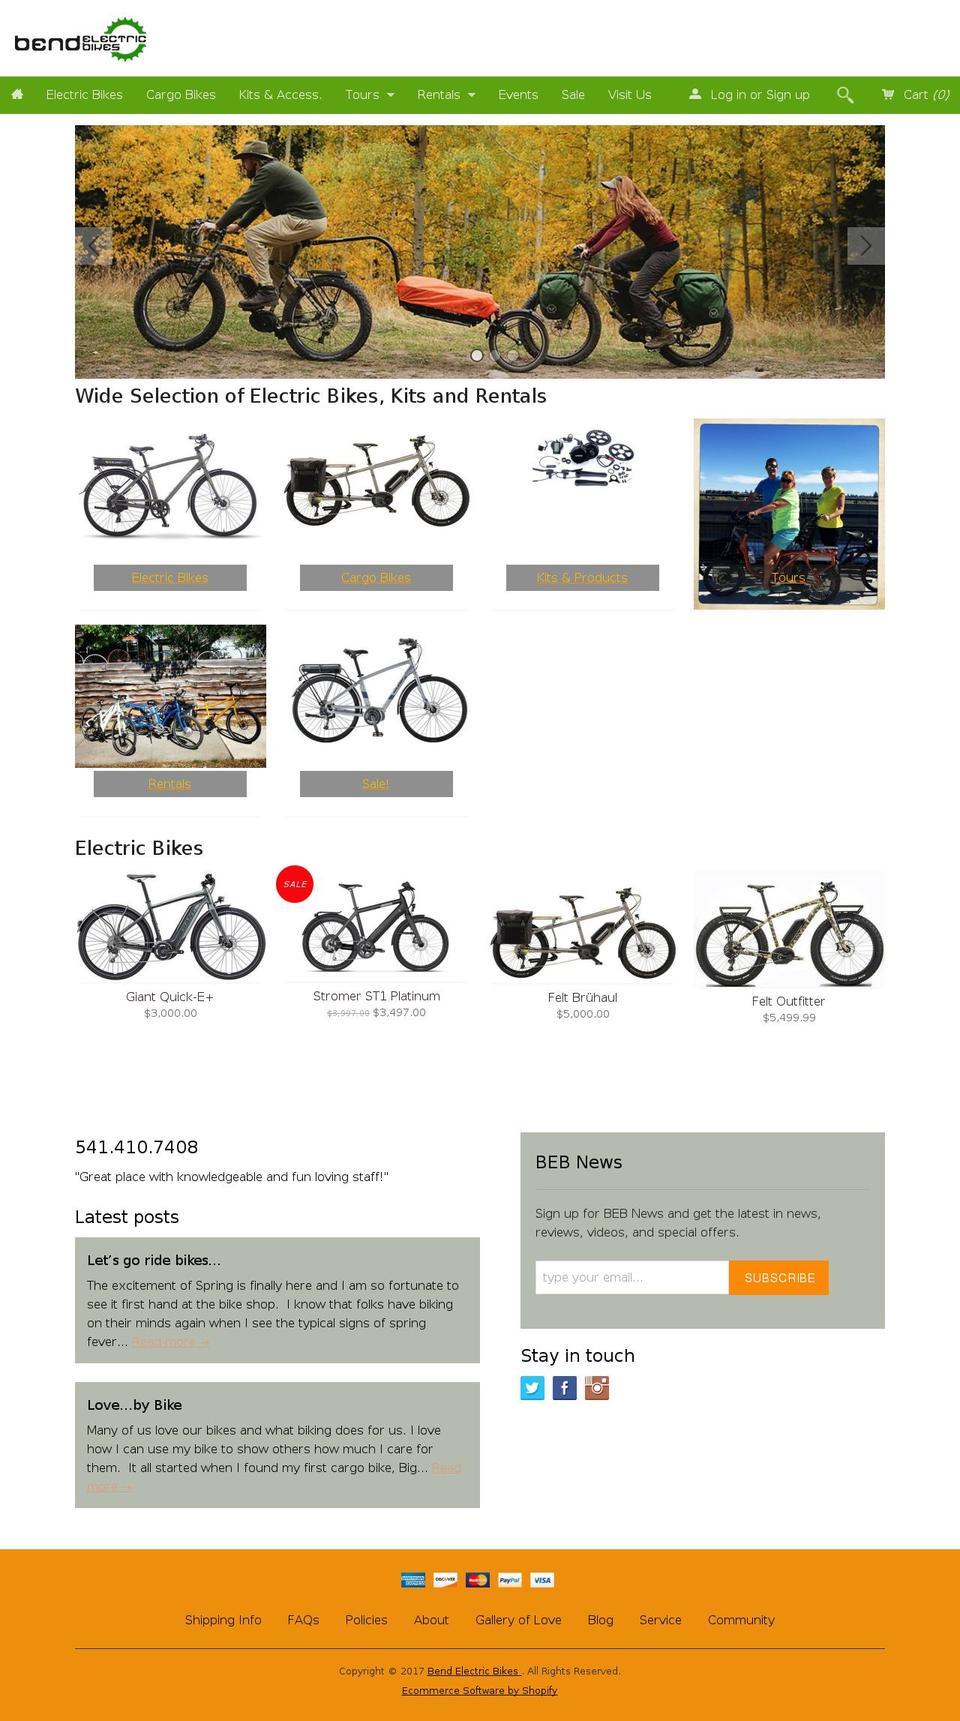 Fluid Shopify theme site example bendelectricvehicles.com